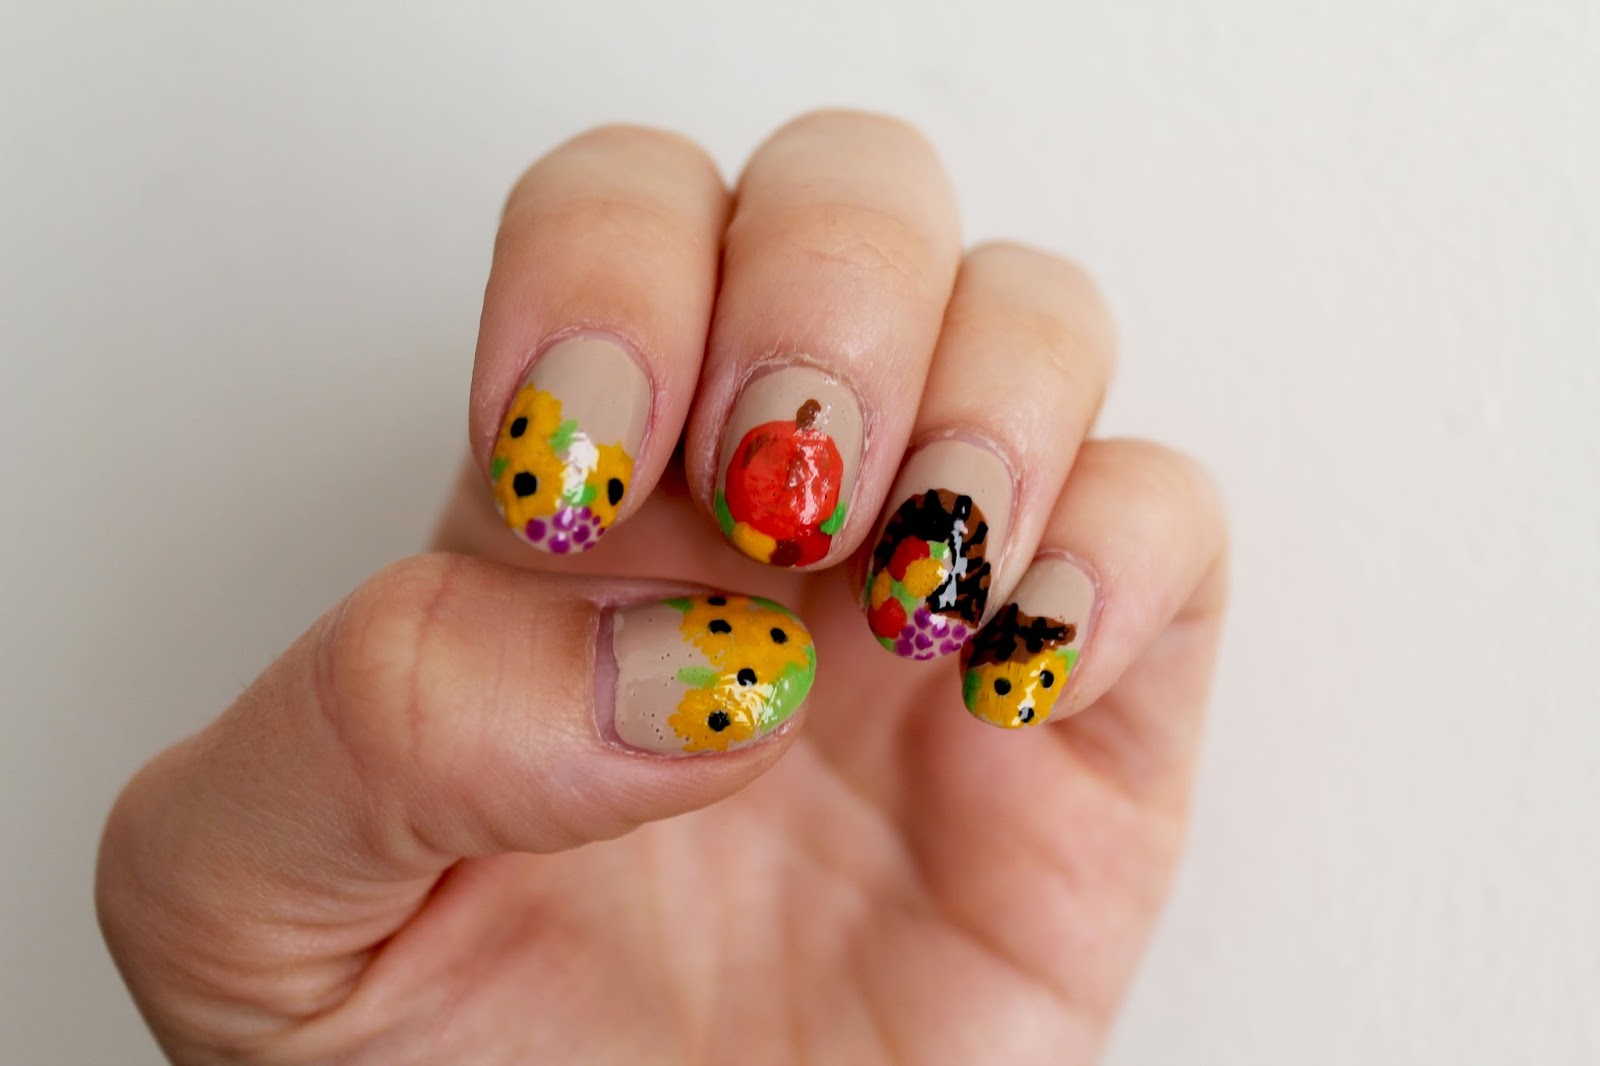 6. "Simple and Cute Thanksgiving Nail Art" - wide 2